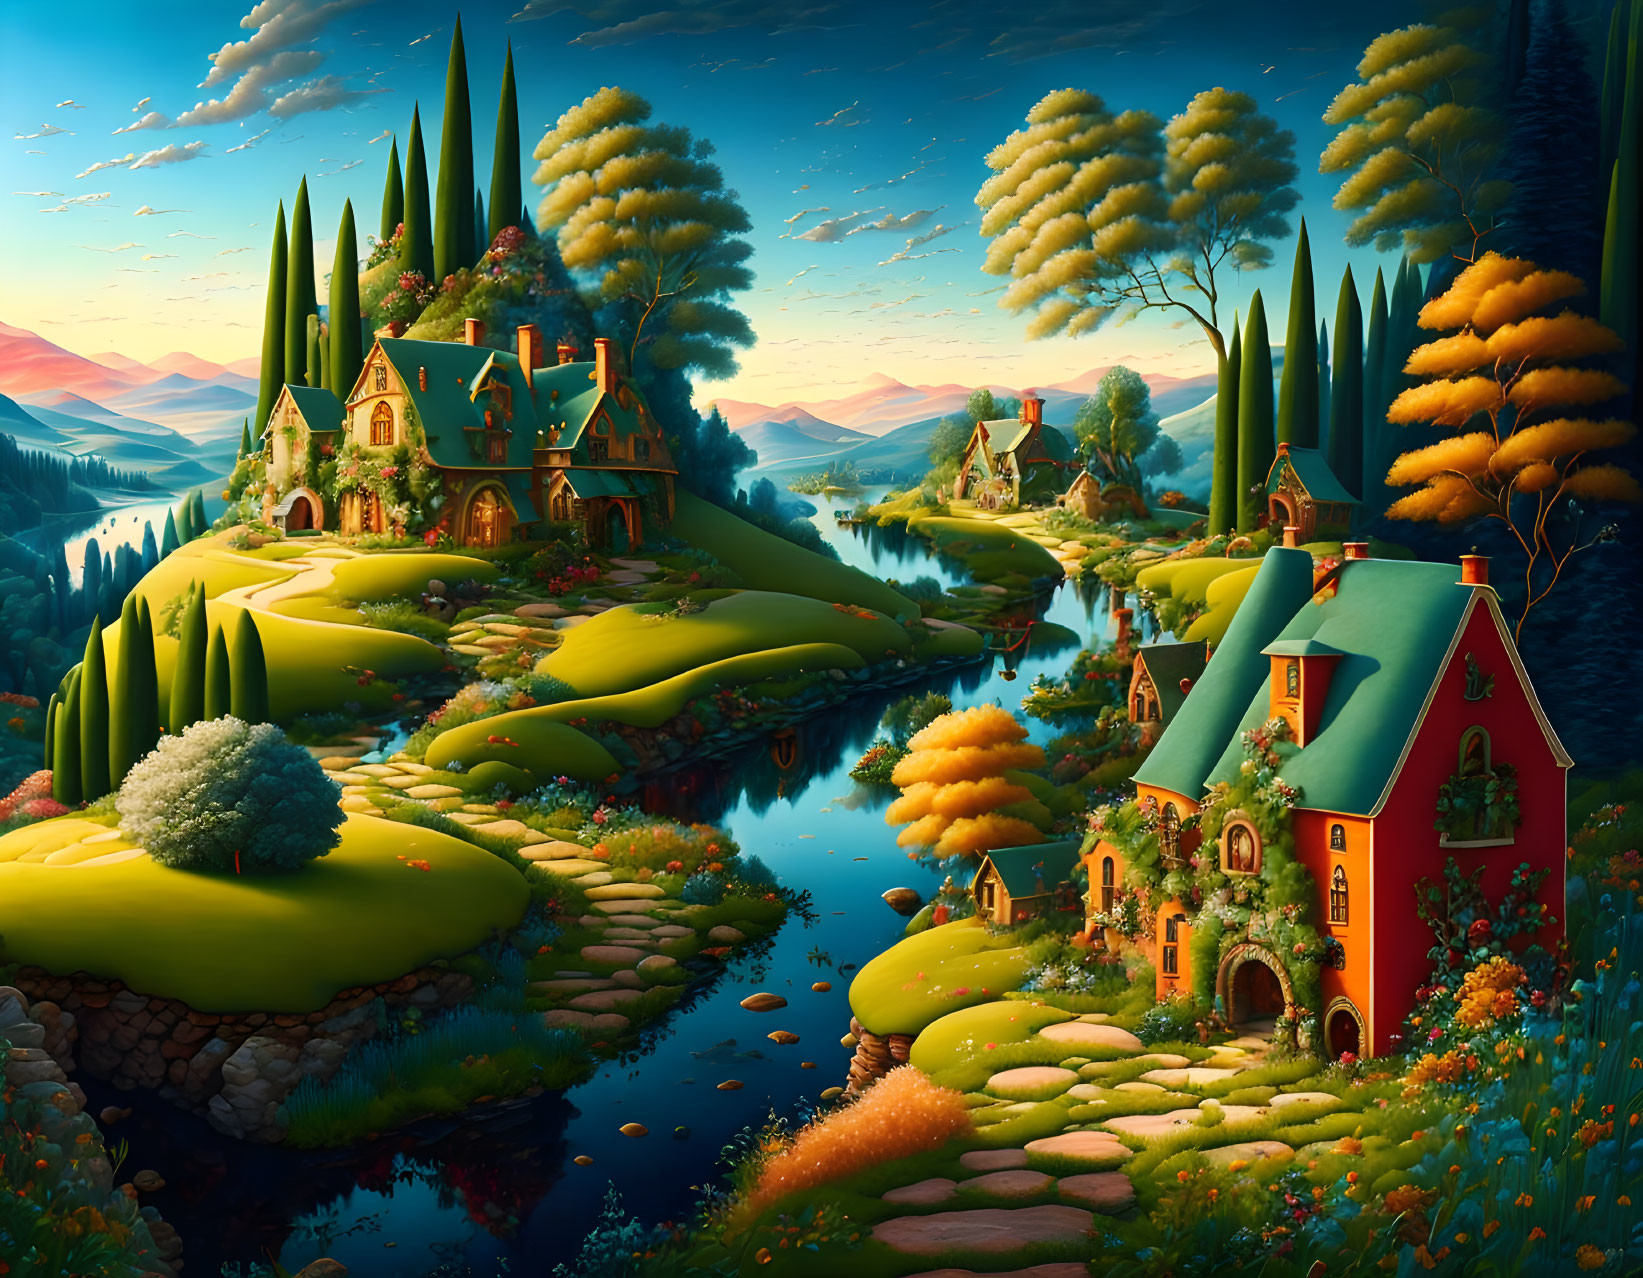 Whimsical landscape with storybook cottages and colorful trees